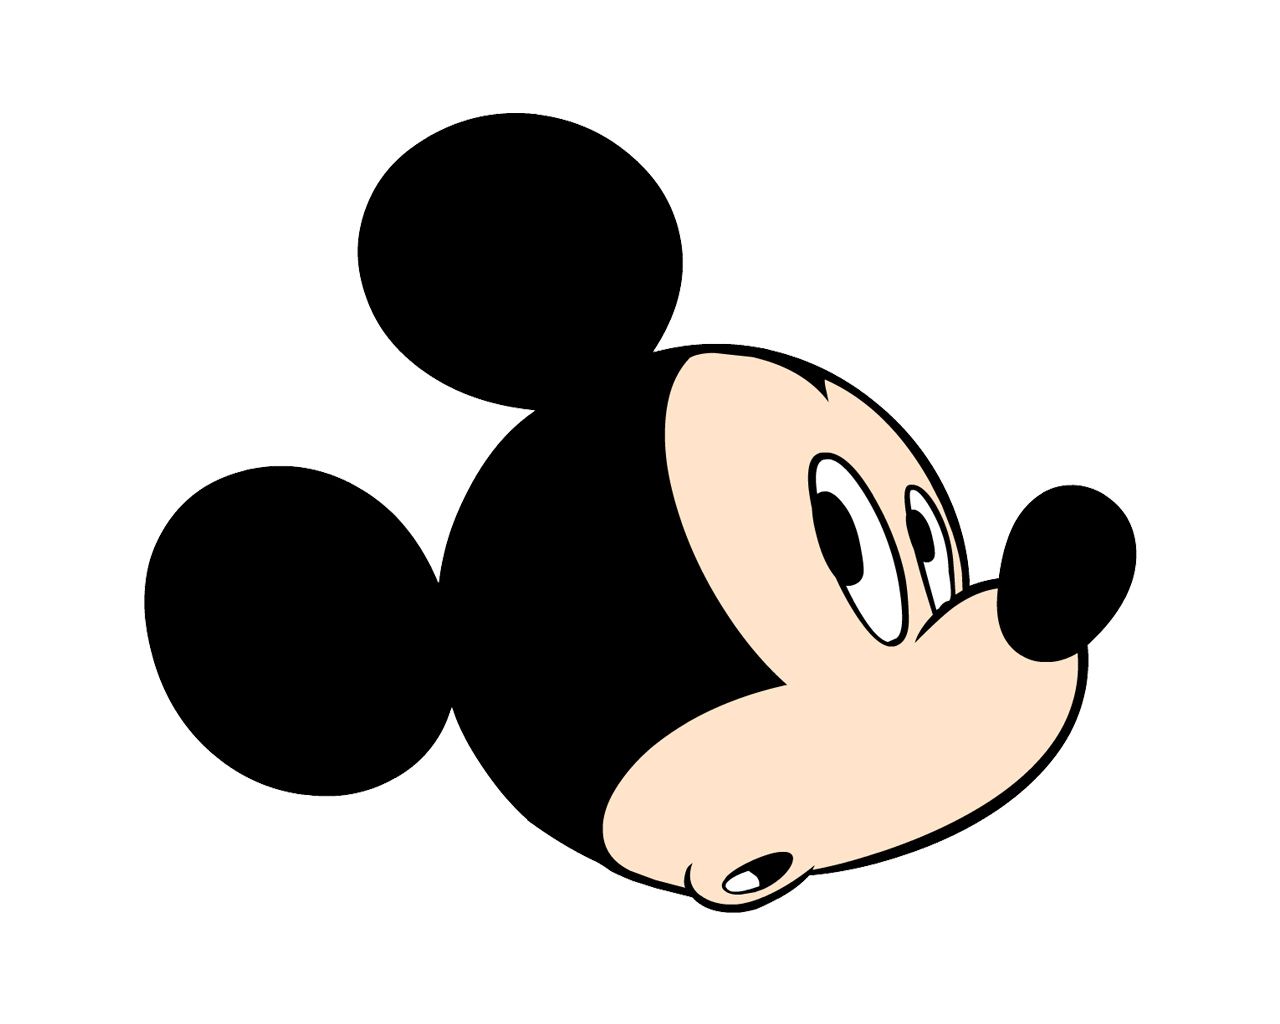 Mickey Mouse Head Black Background images